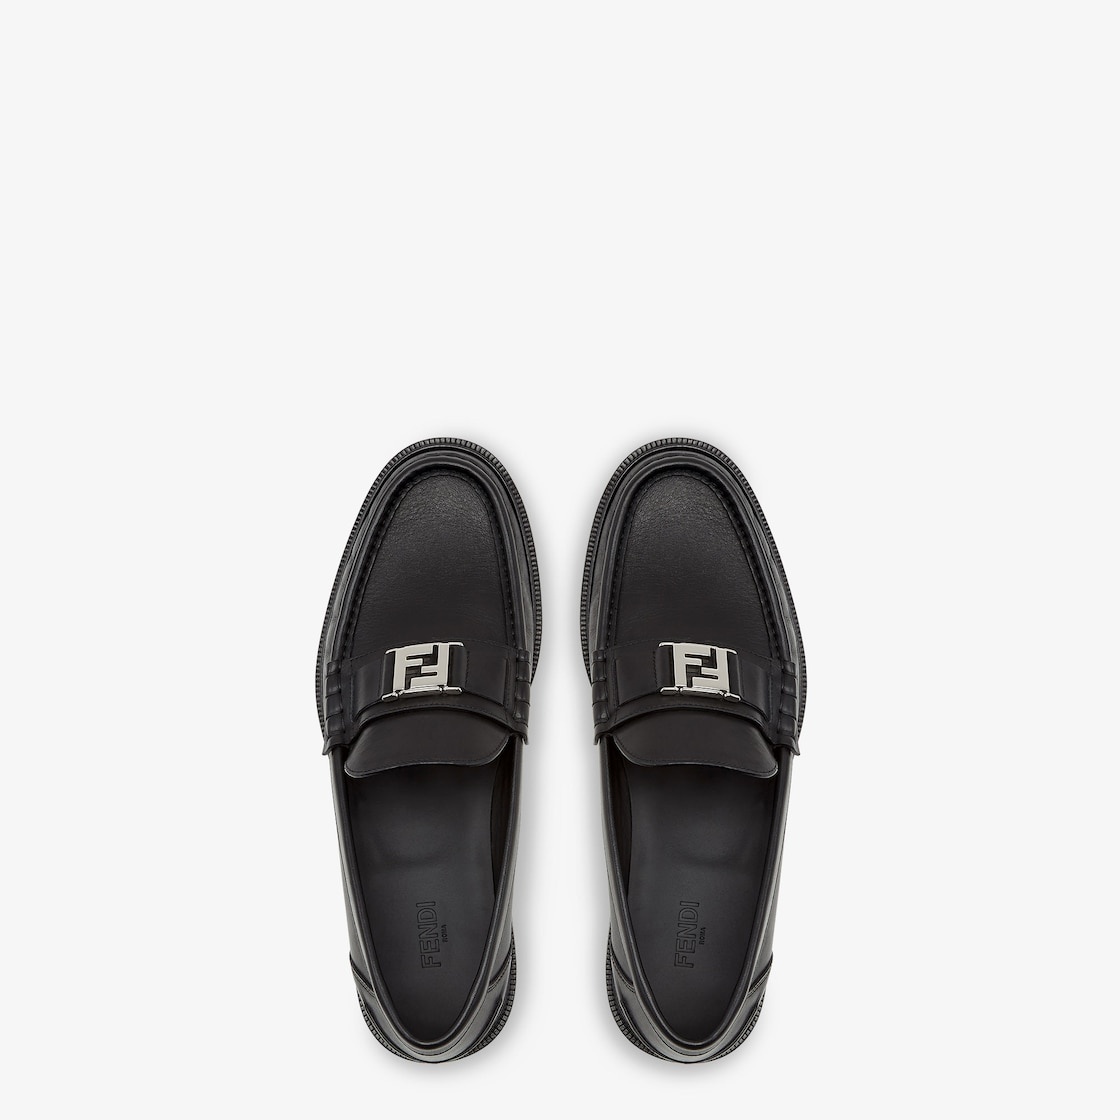 FF Squared Loafers - 4